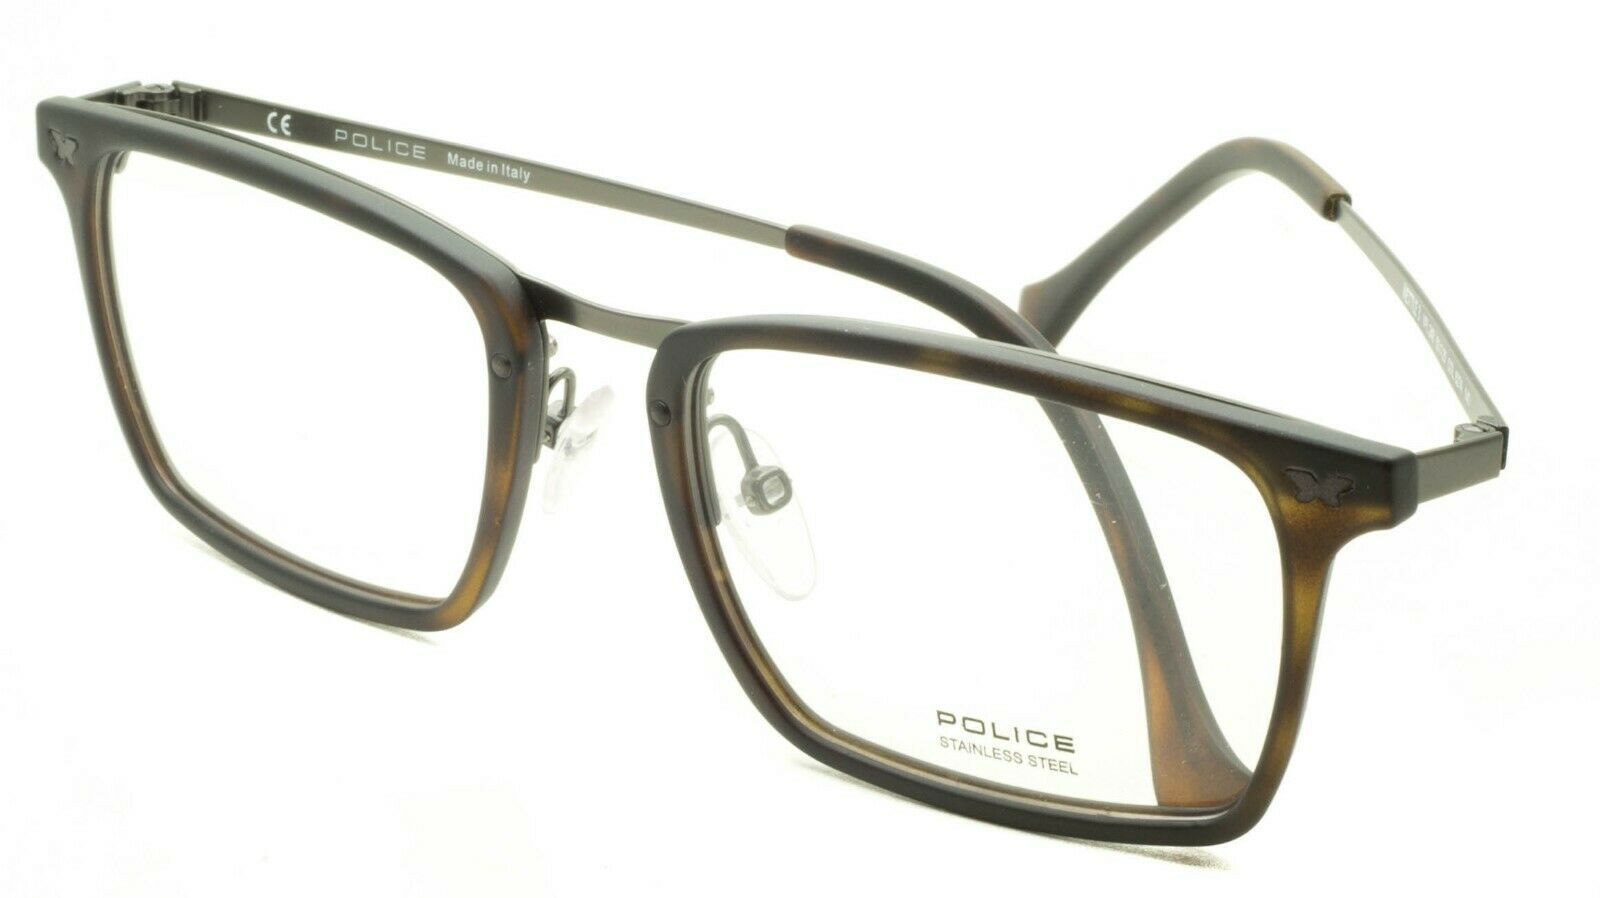 POLICE METTLE 3 VPL 248 COL. 627A 53mm Eyewear FRAMES Glasses RX Optical - New